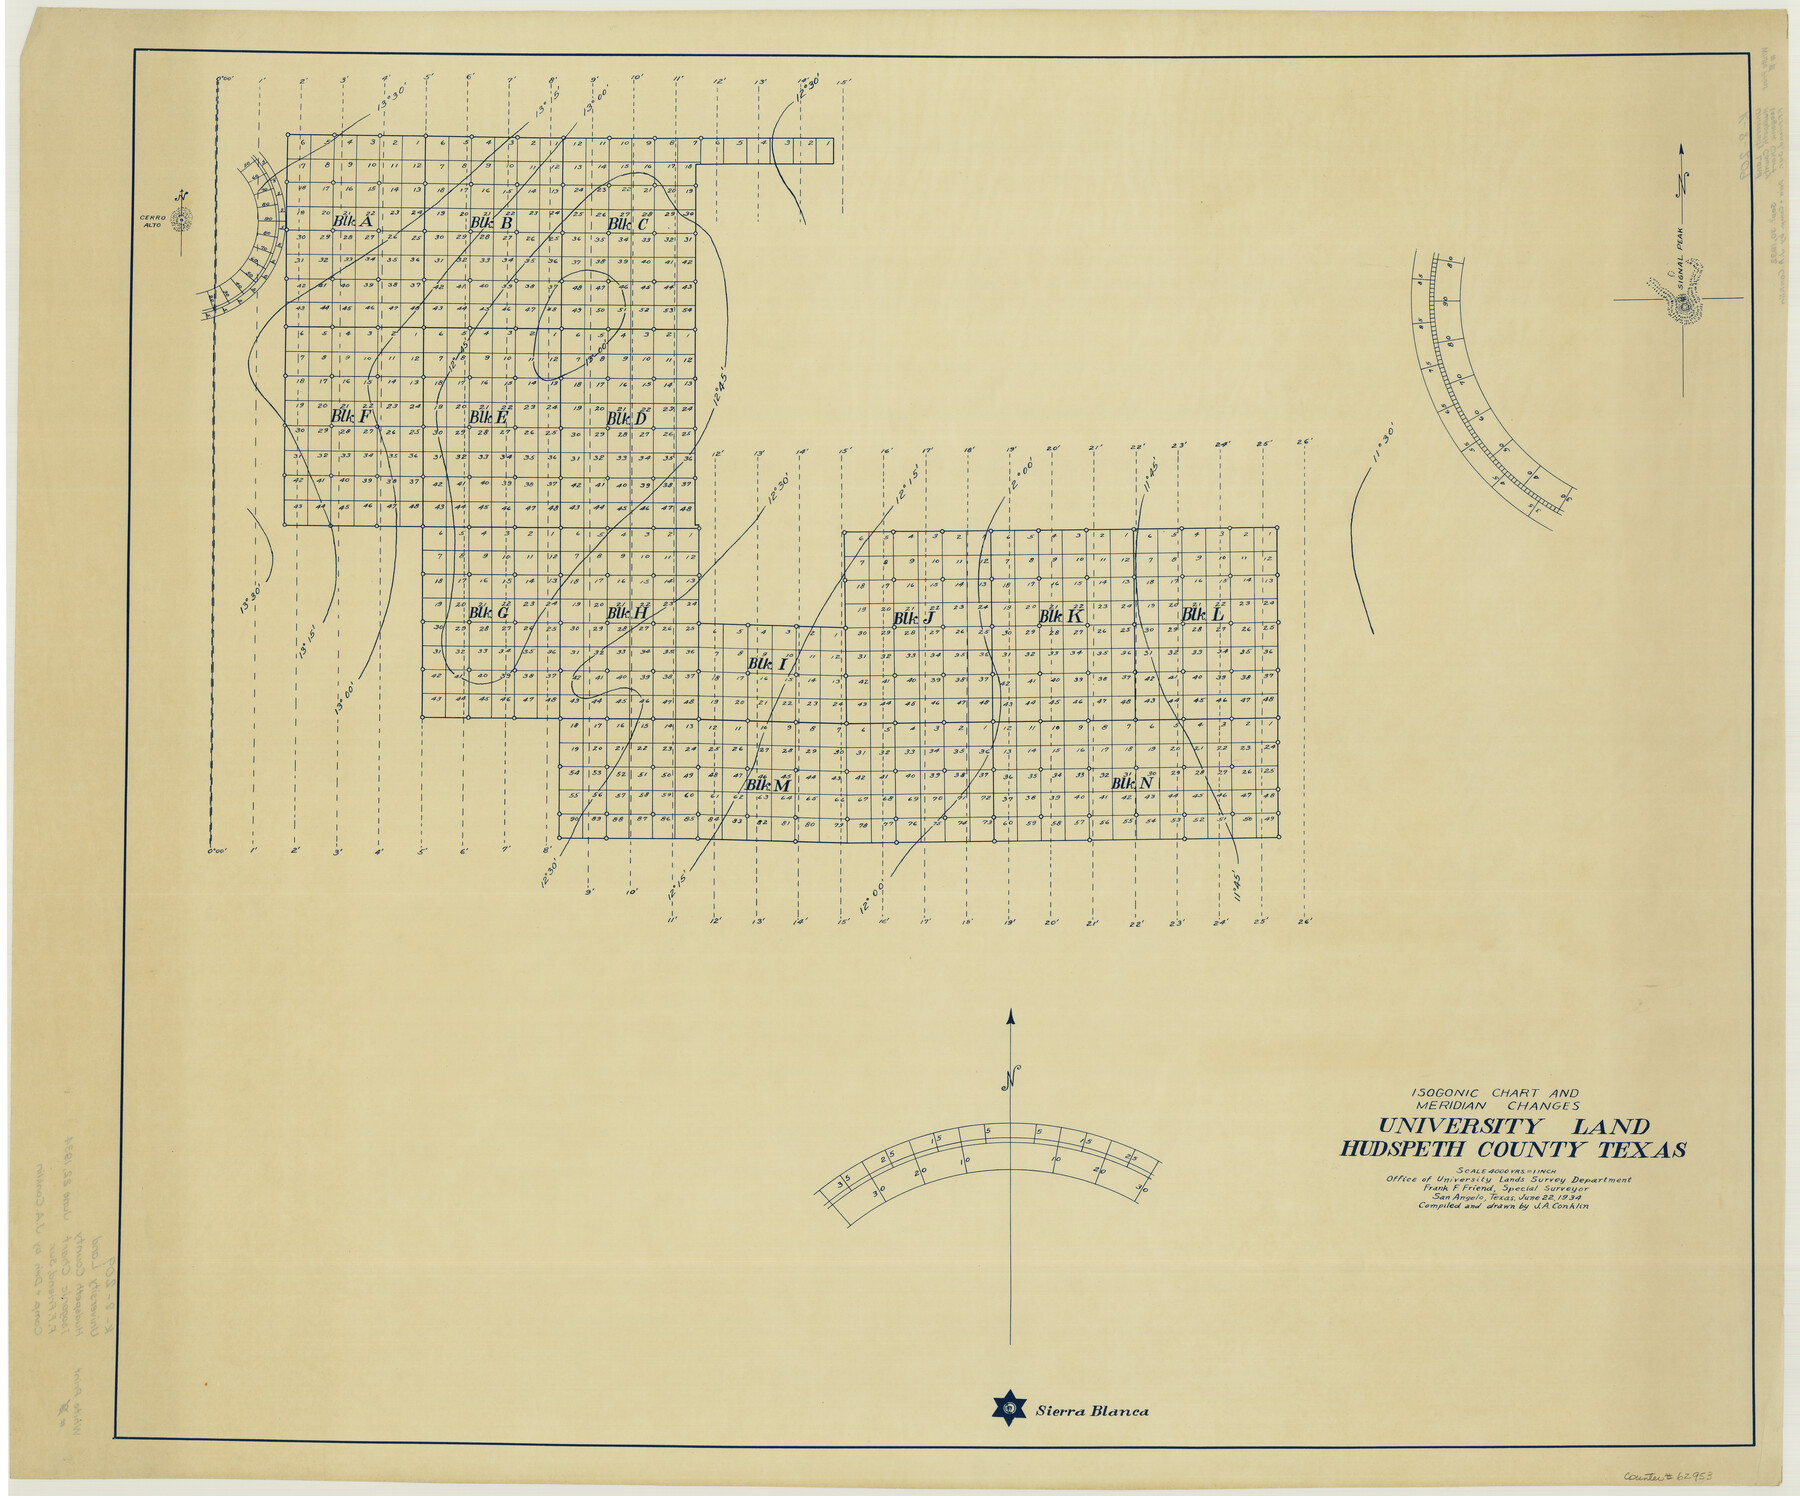 62953, Isogonic Chart and Meridian Changes, University Land, Hudspeth County, Texas, General Map Collection